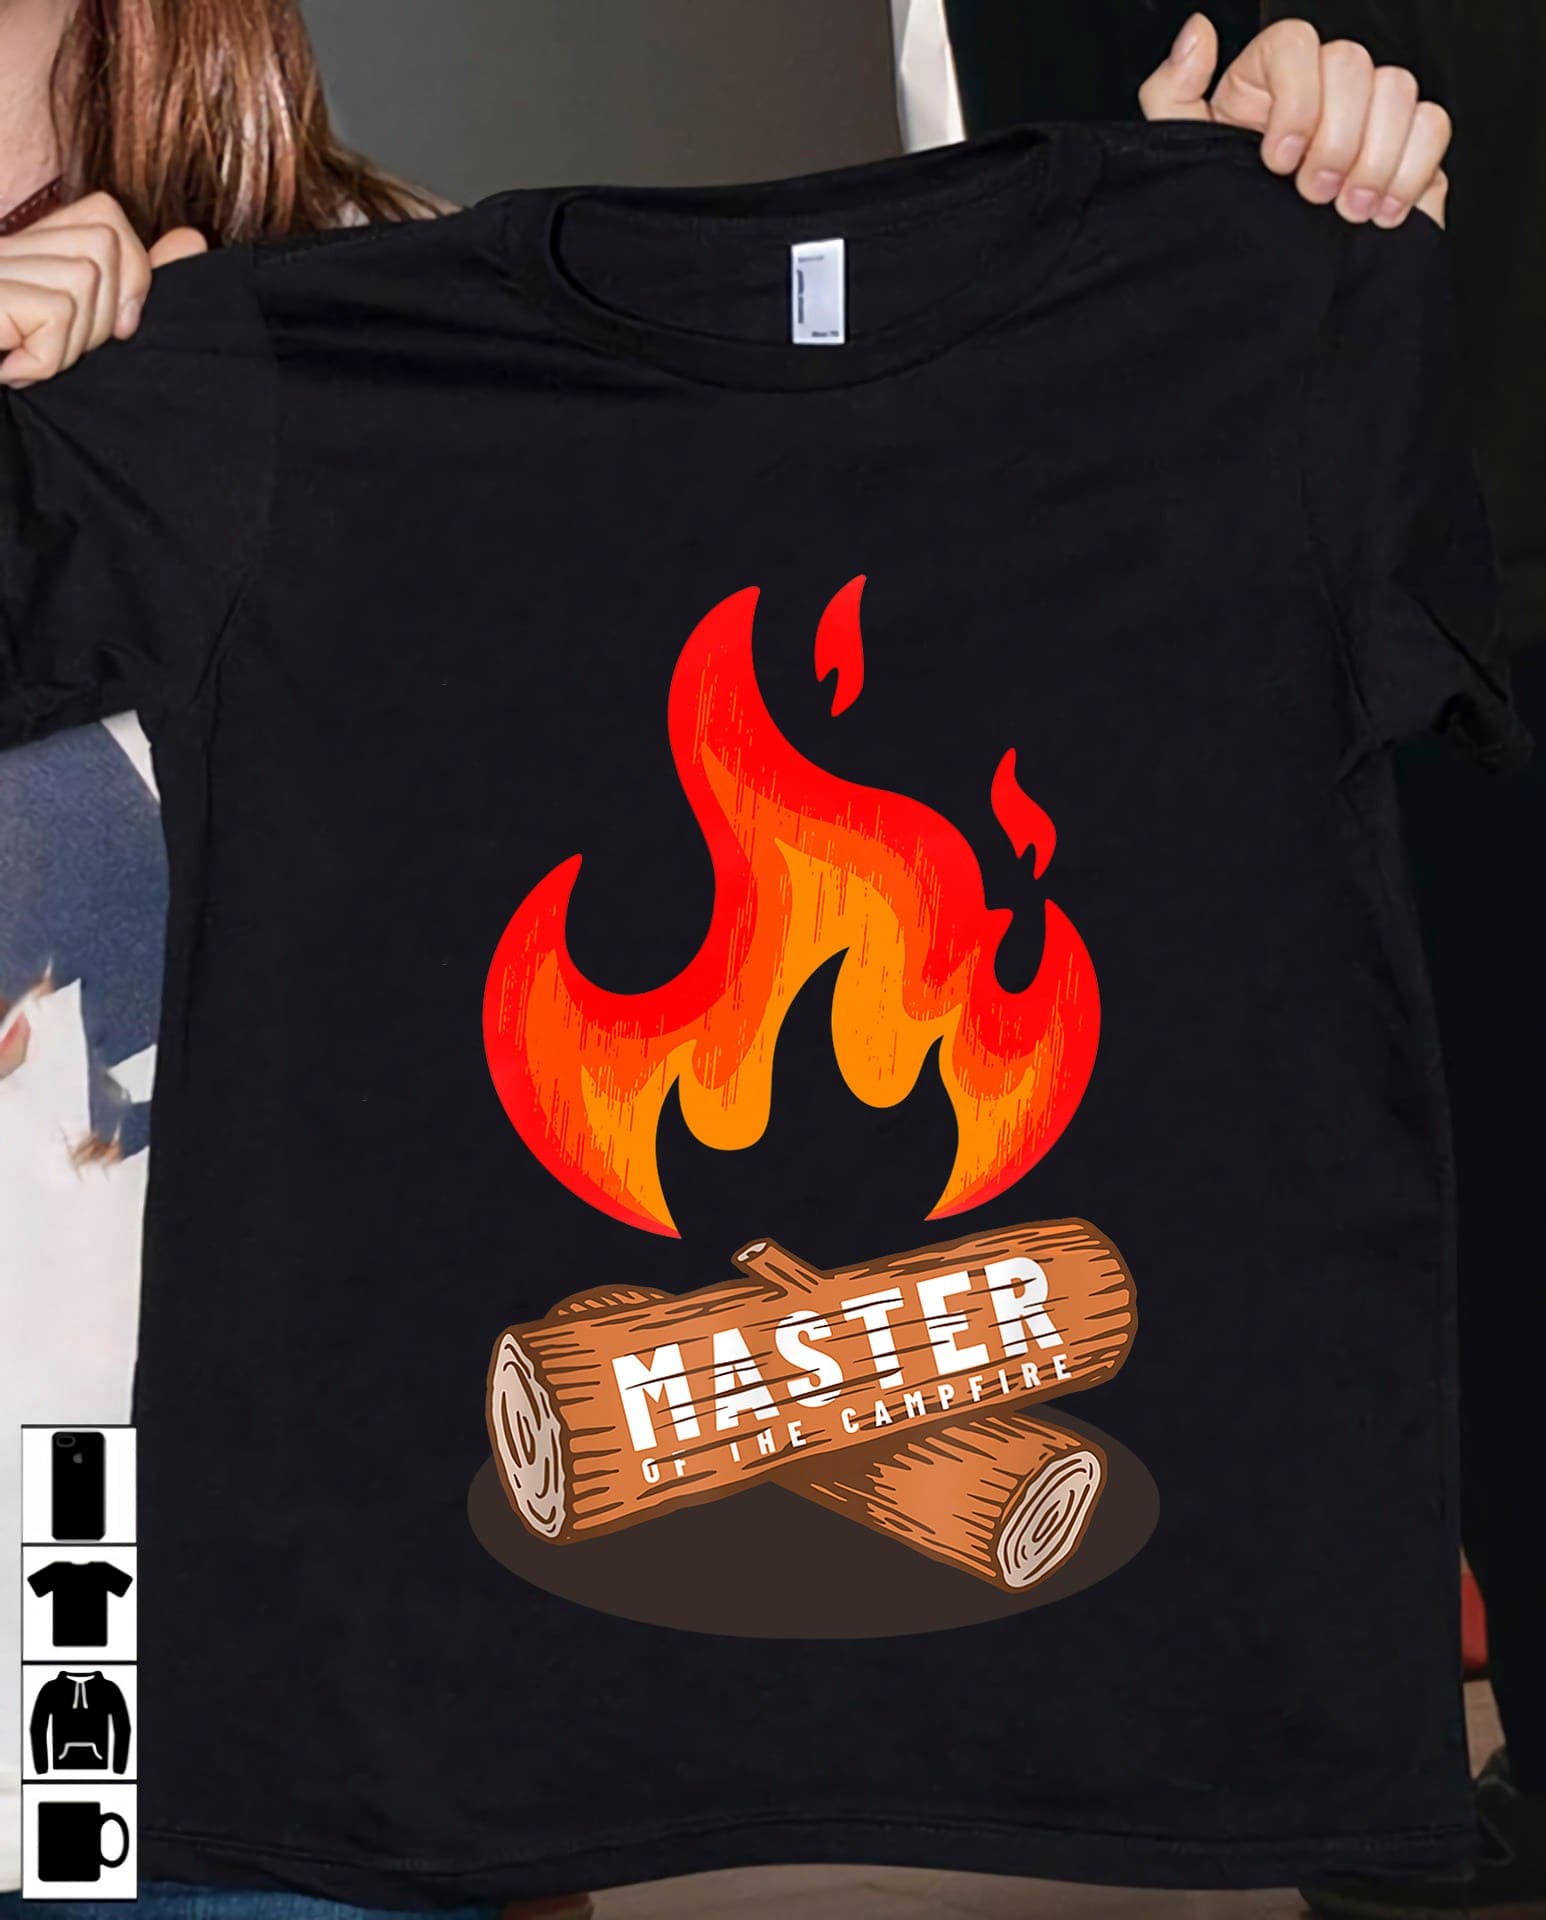 Campfire Graphic T-shirt - Master of the campfire